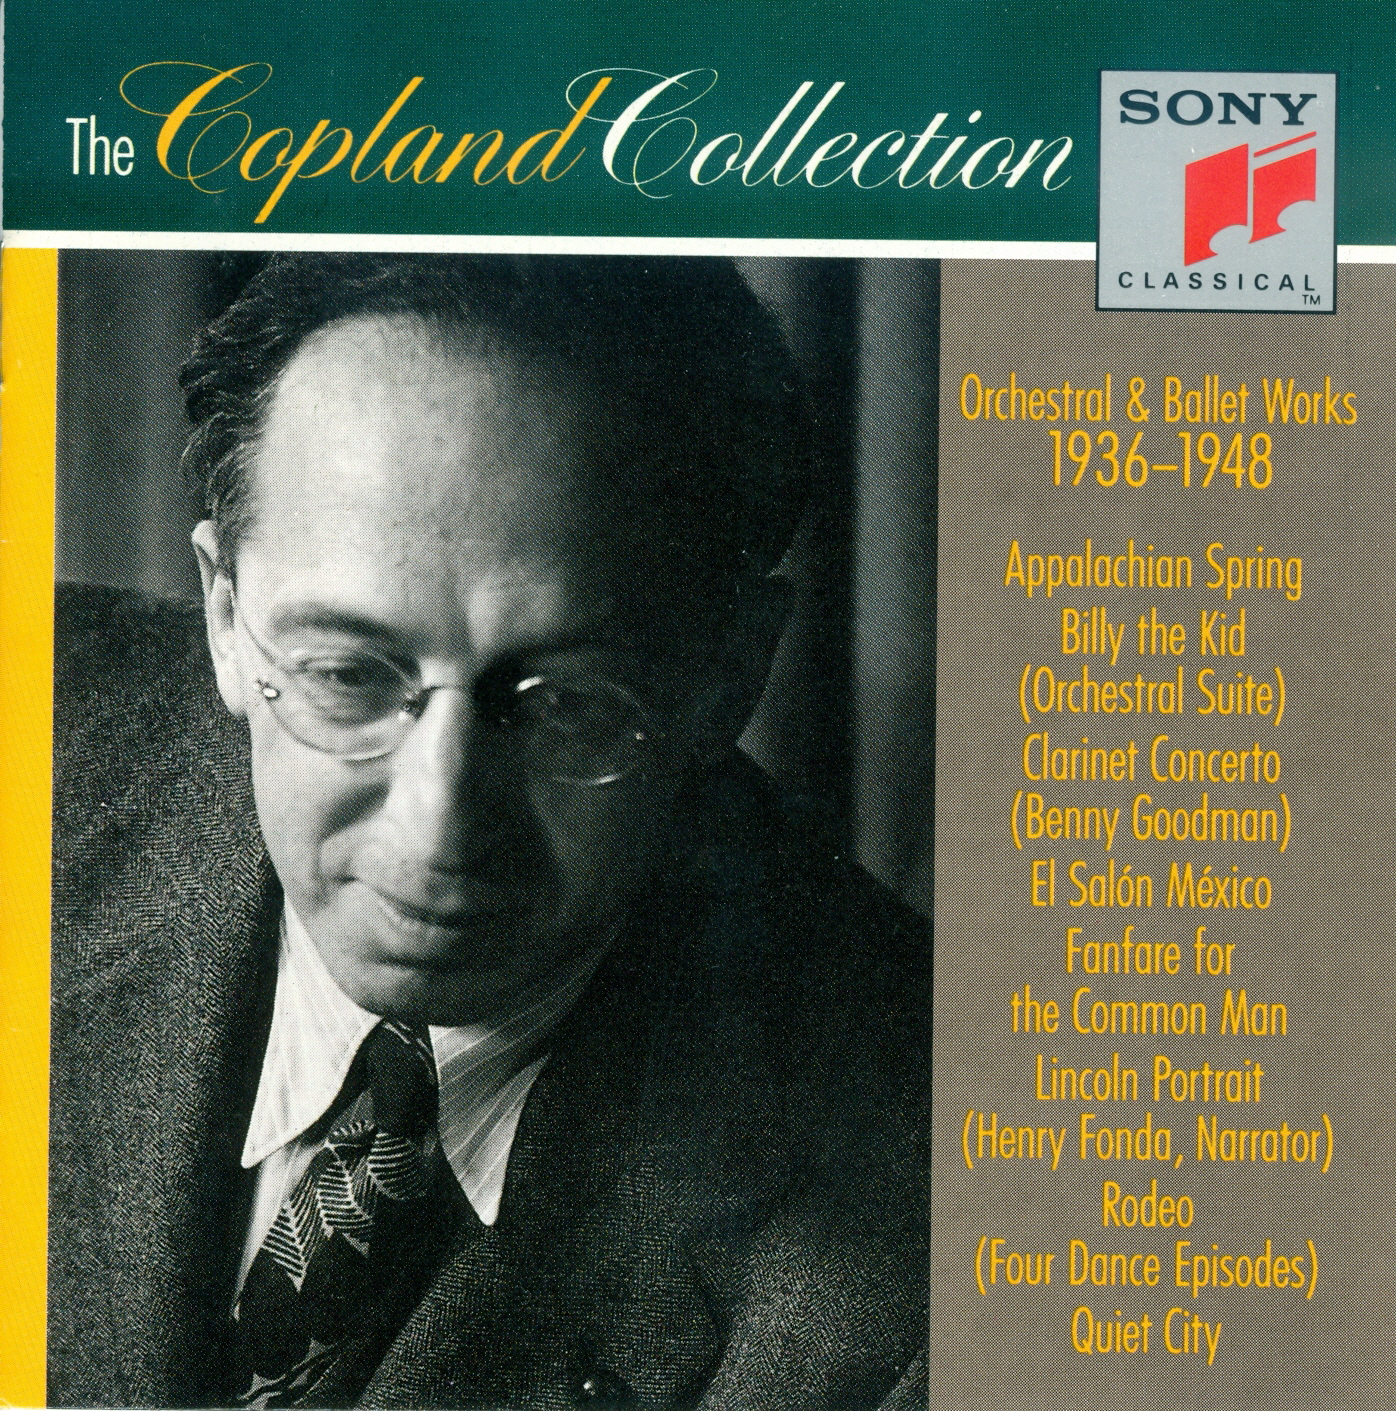 Aaron Copland - The Copland Collection 1936-1948 - Disc 3